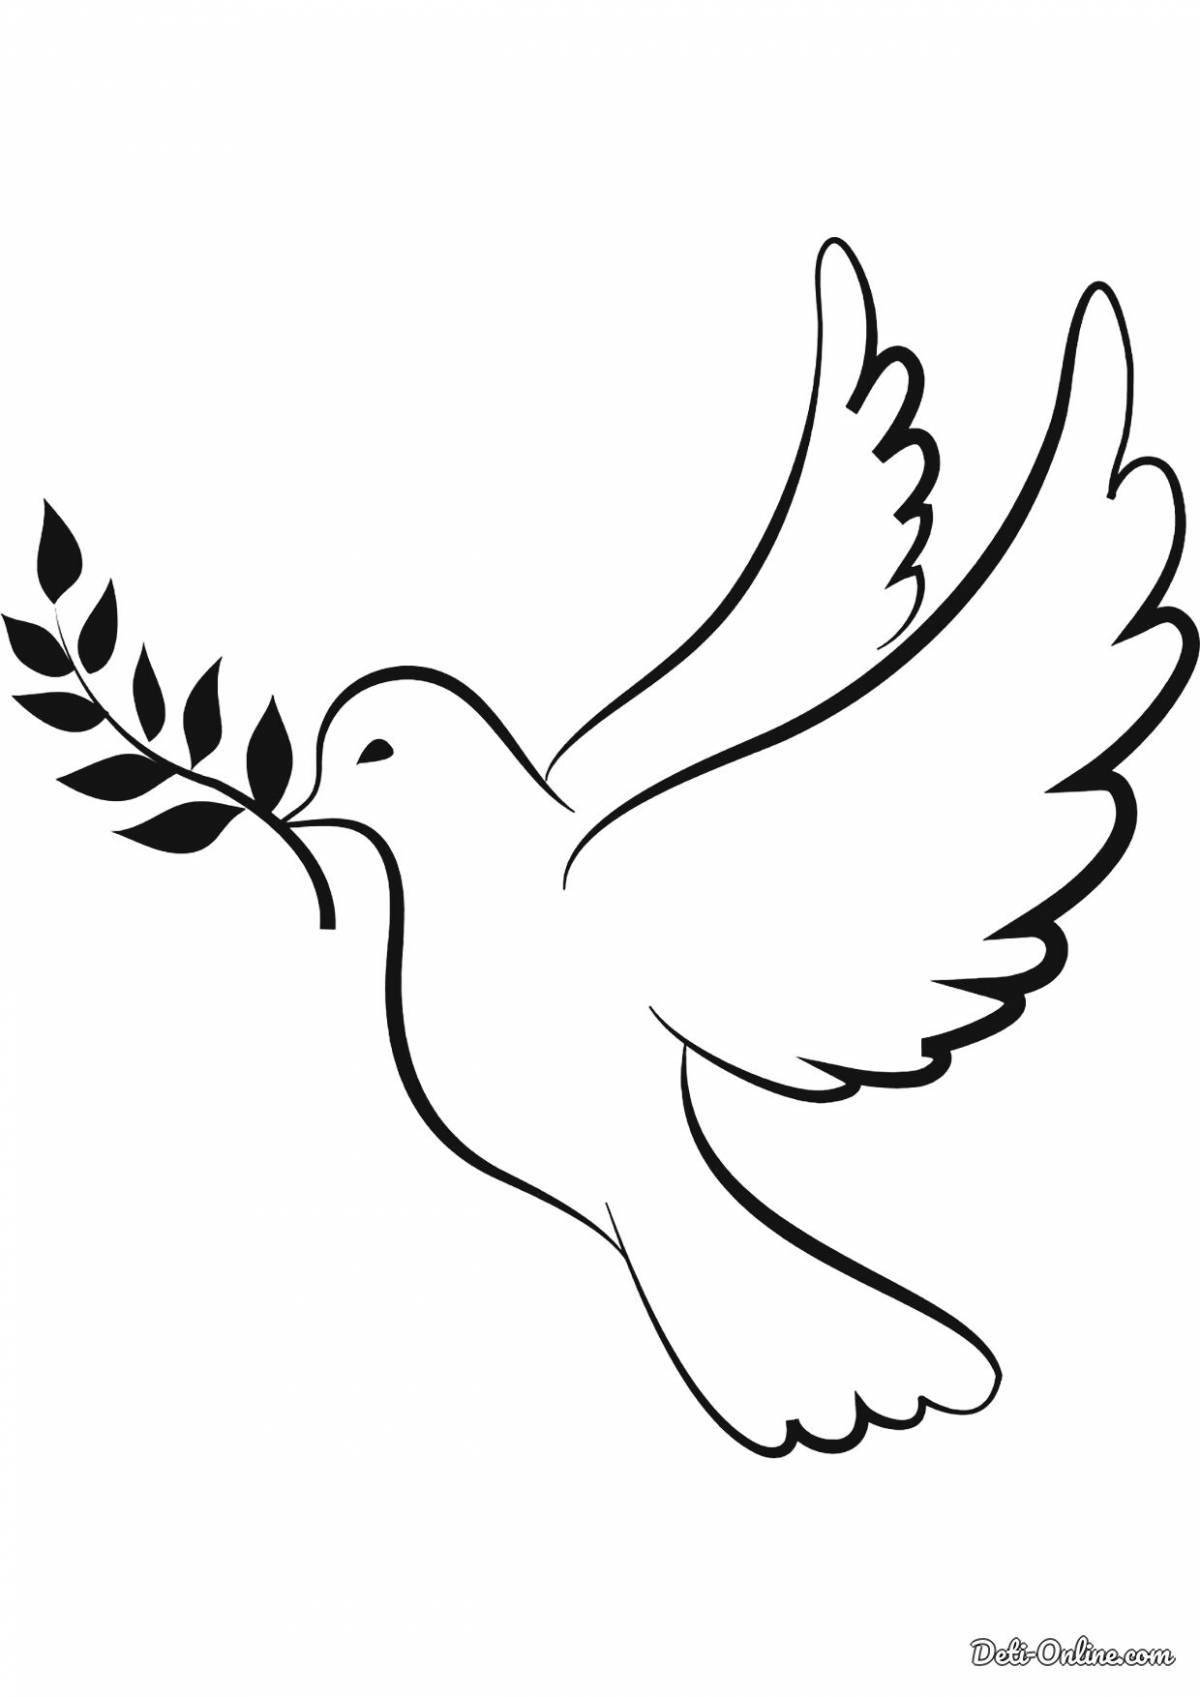 Peace dove coloring book for kids